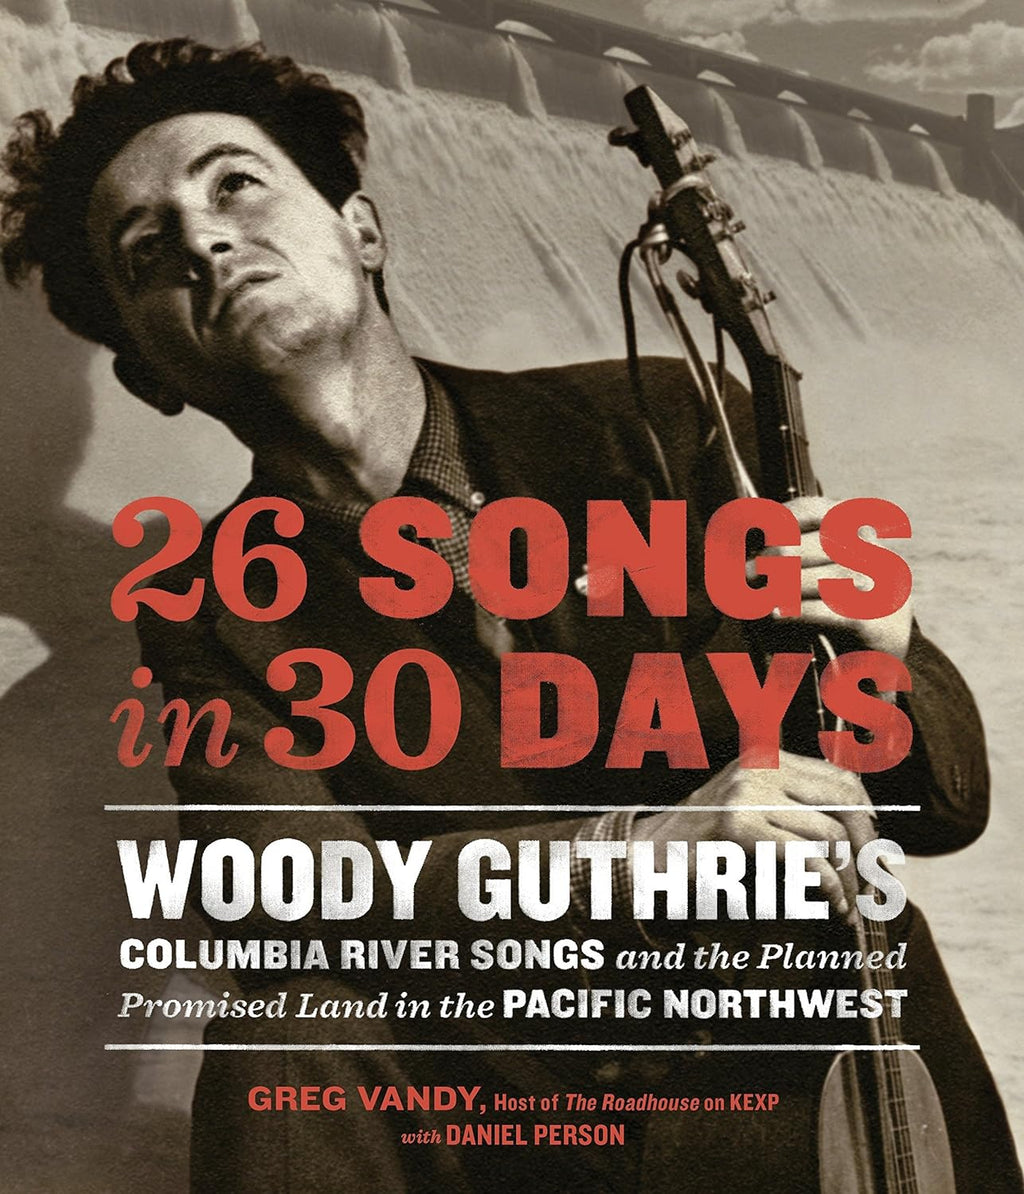 26 Songs in 30 Days: Woody Guthrie's Columbia River Songs and the Planned Promised Land in the Pacific Northwest